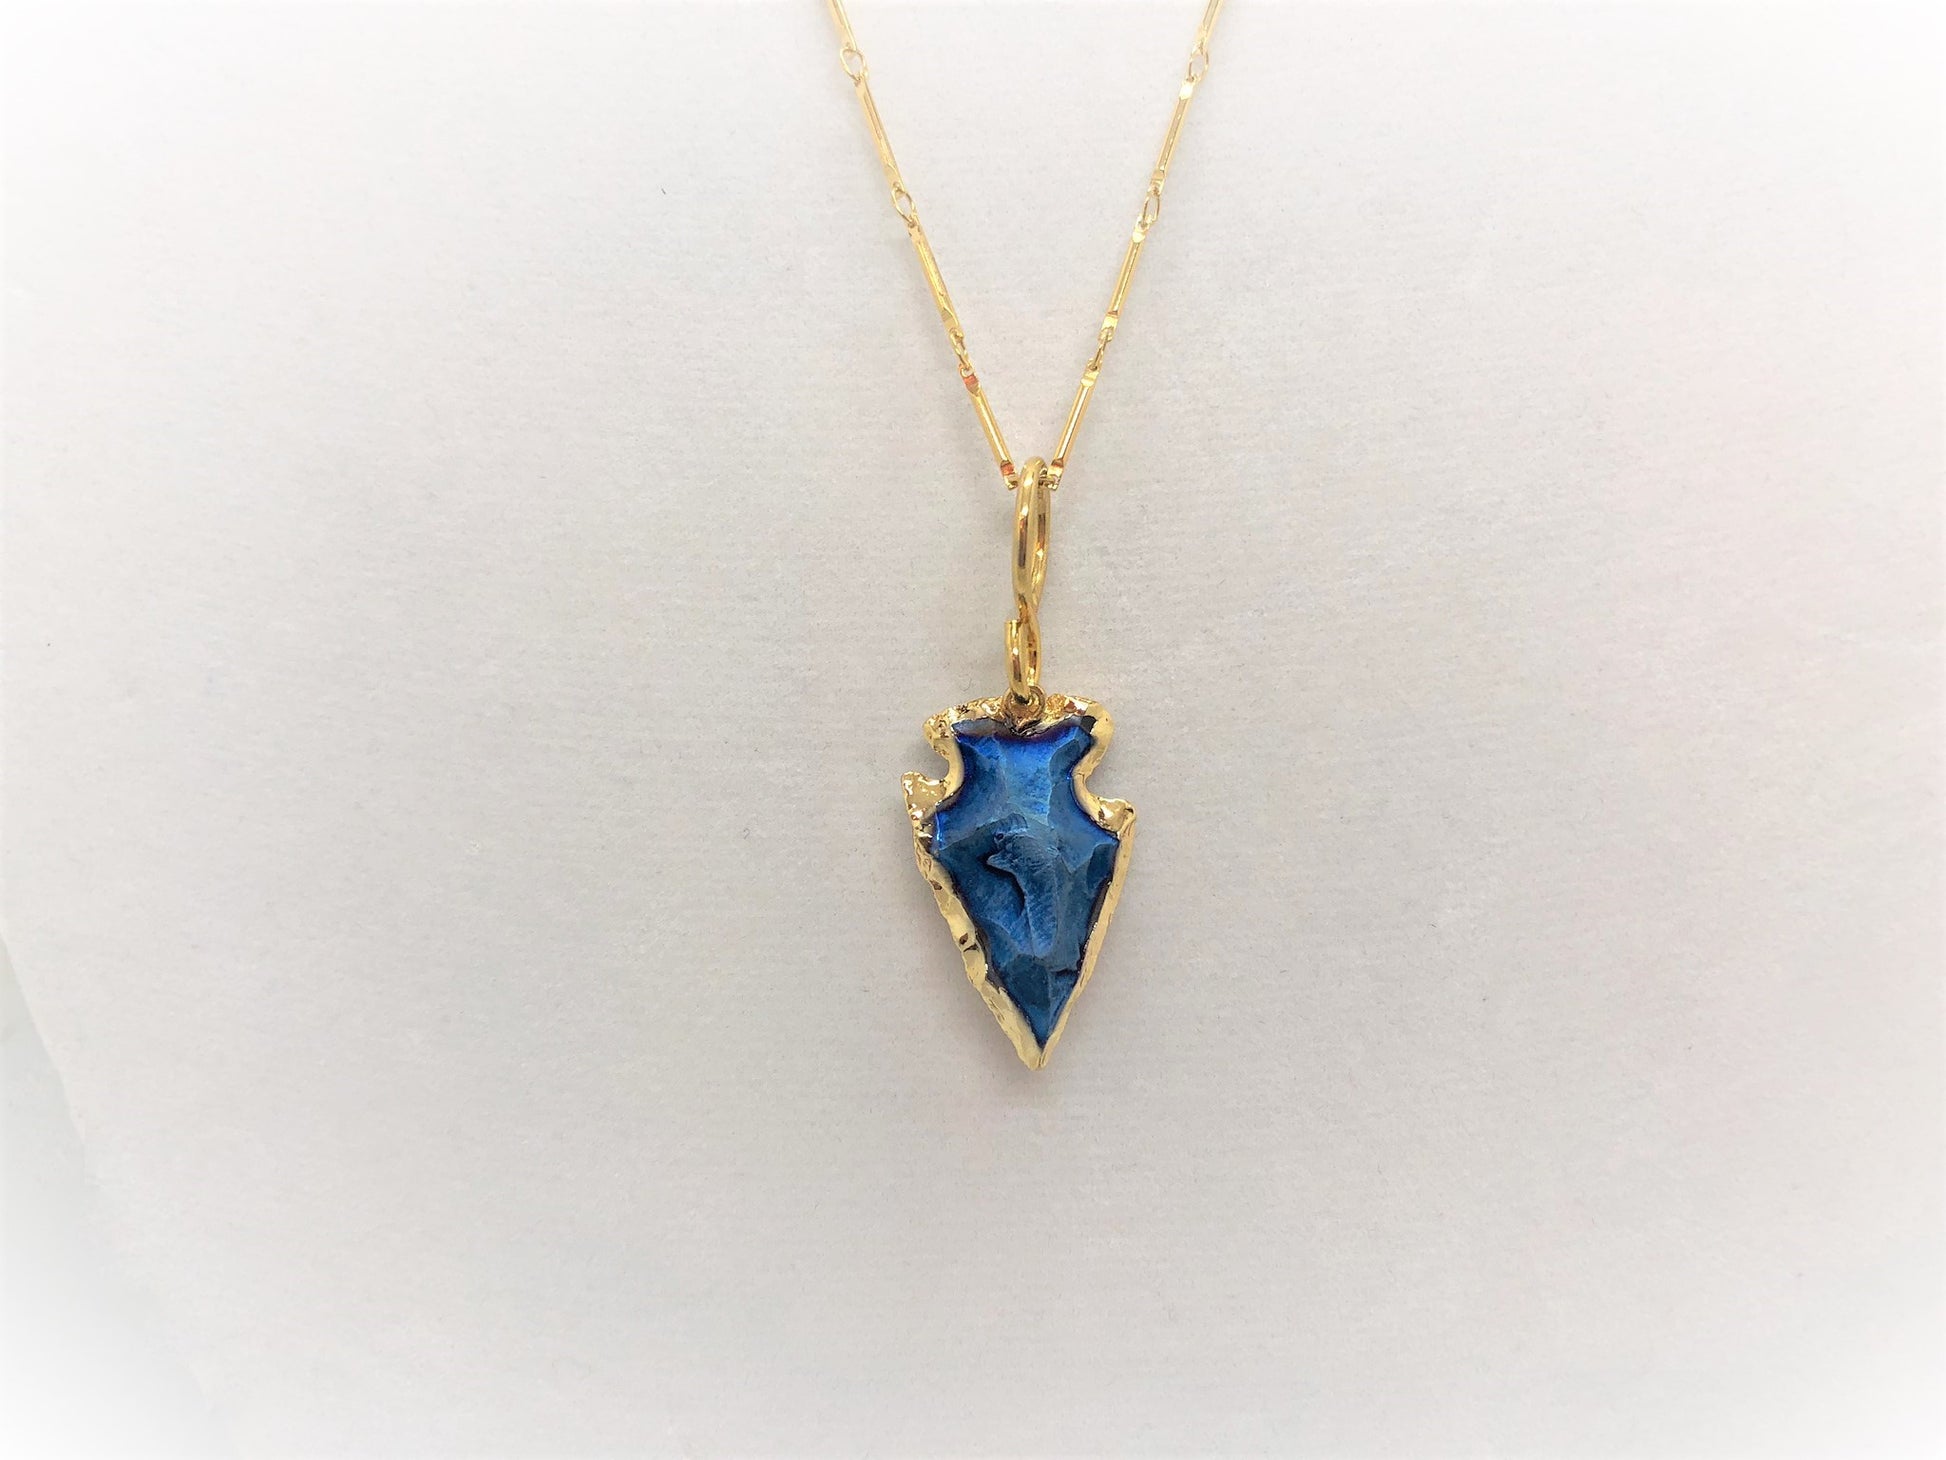 Gold Arrowhead Pendant Necklace - Emmis Jewelry, Necklace, [product_color]